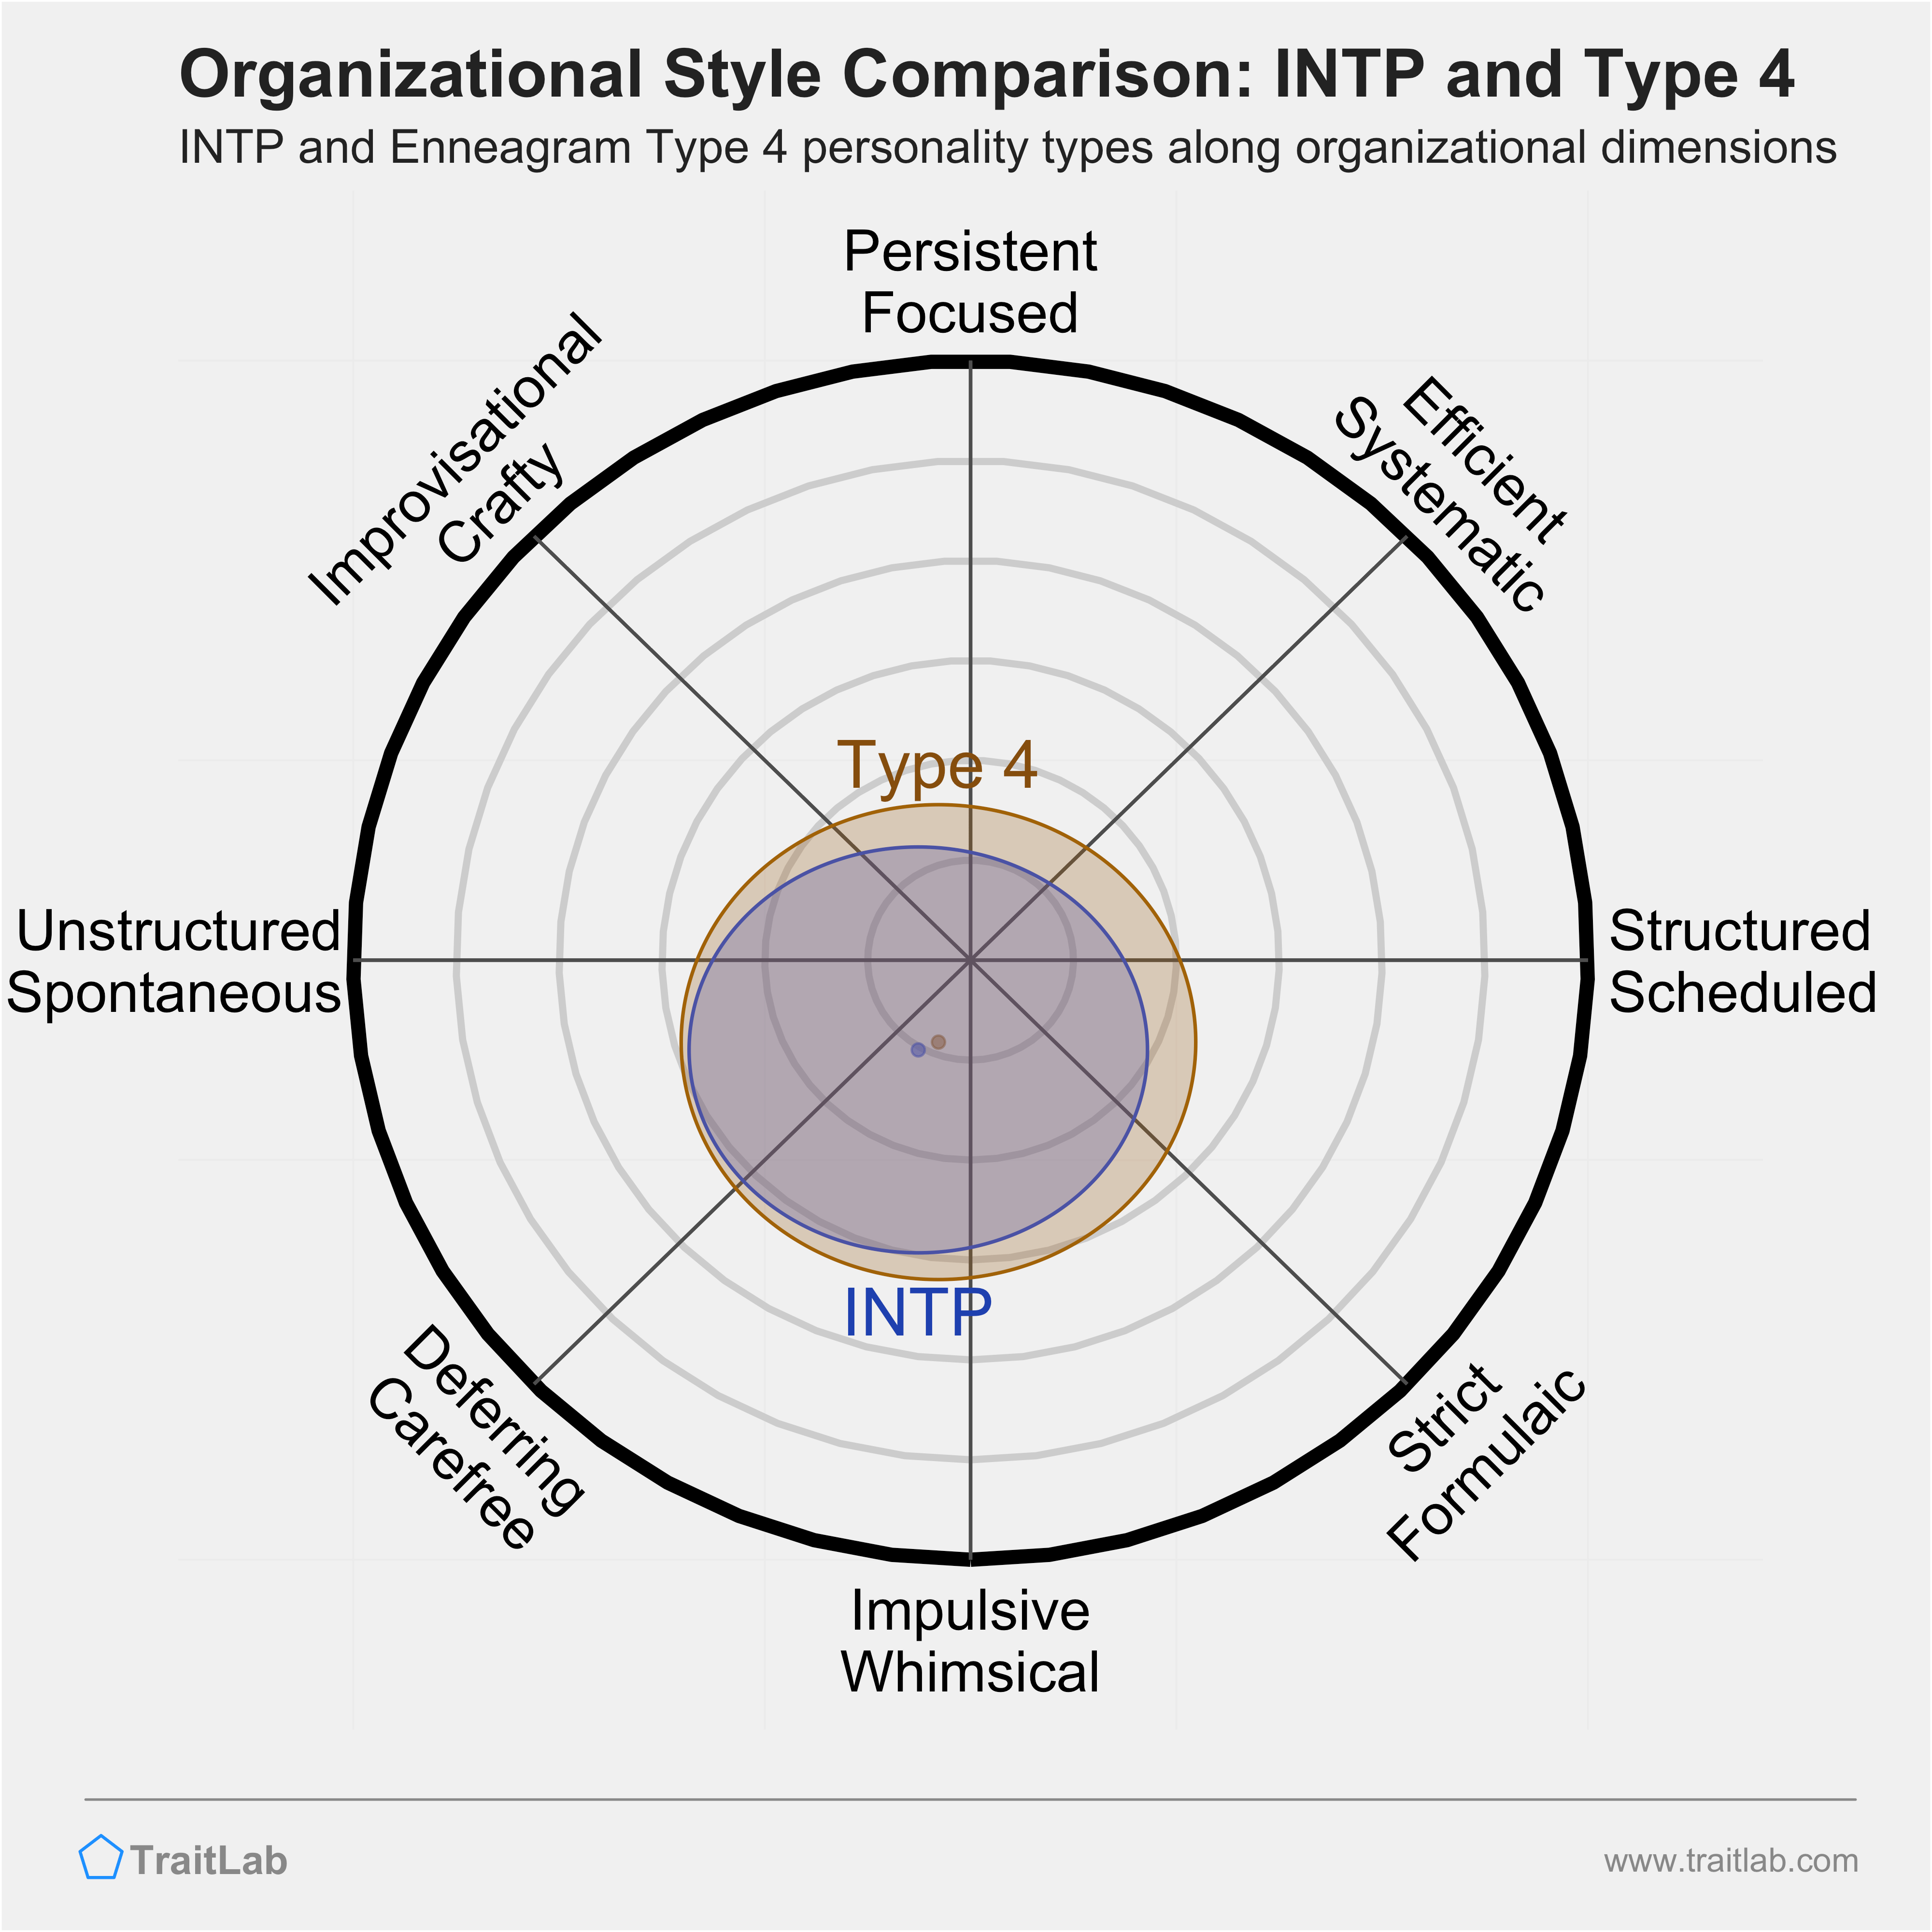 INTP and Type 4 comparison across organizational dimensions